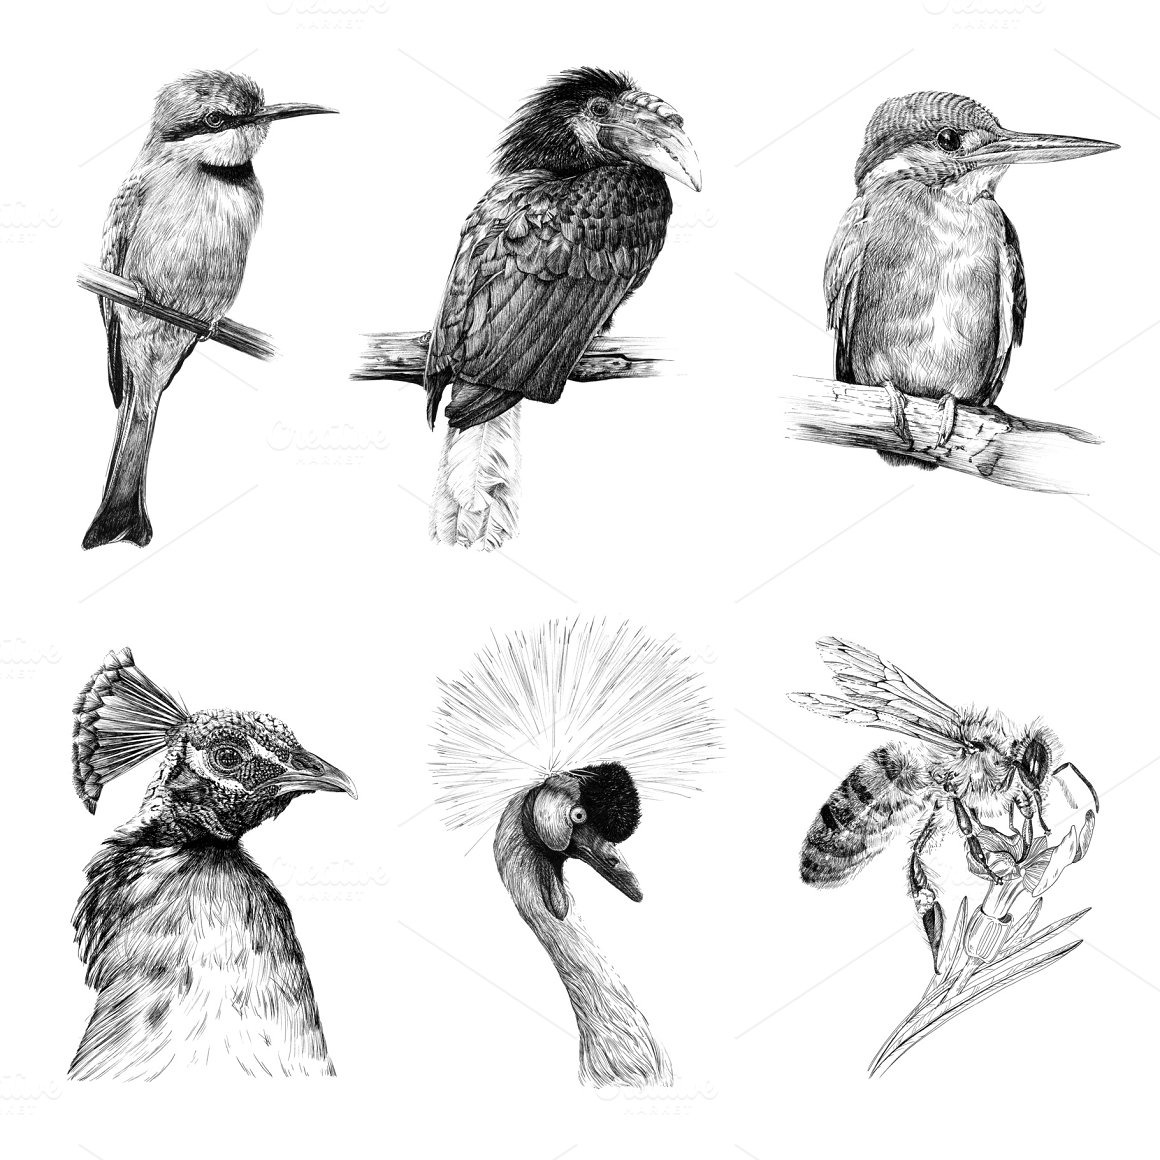 Gray images of birds.